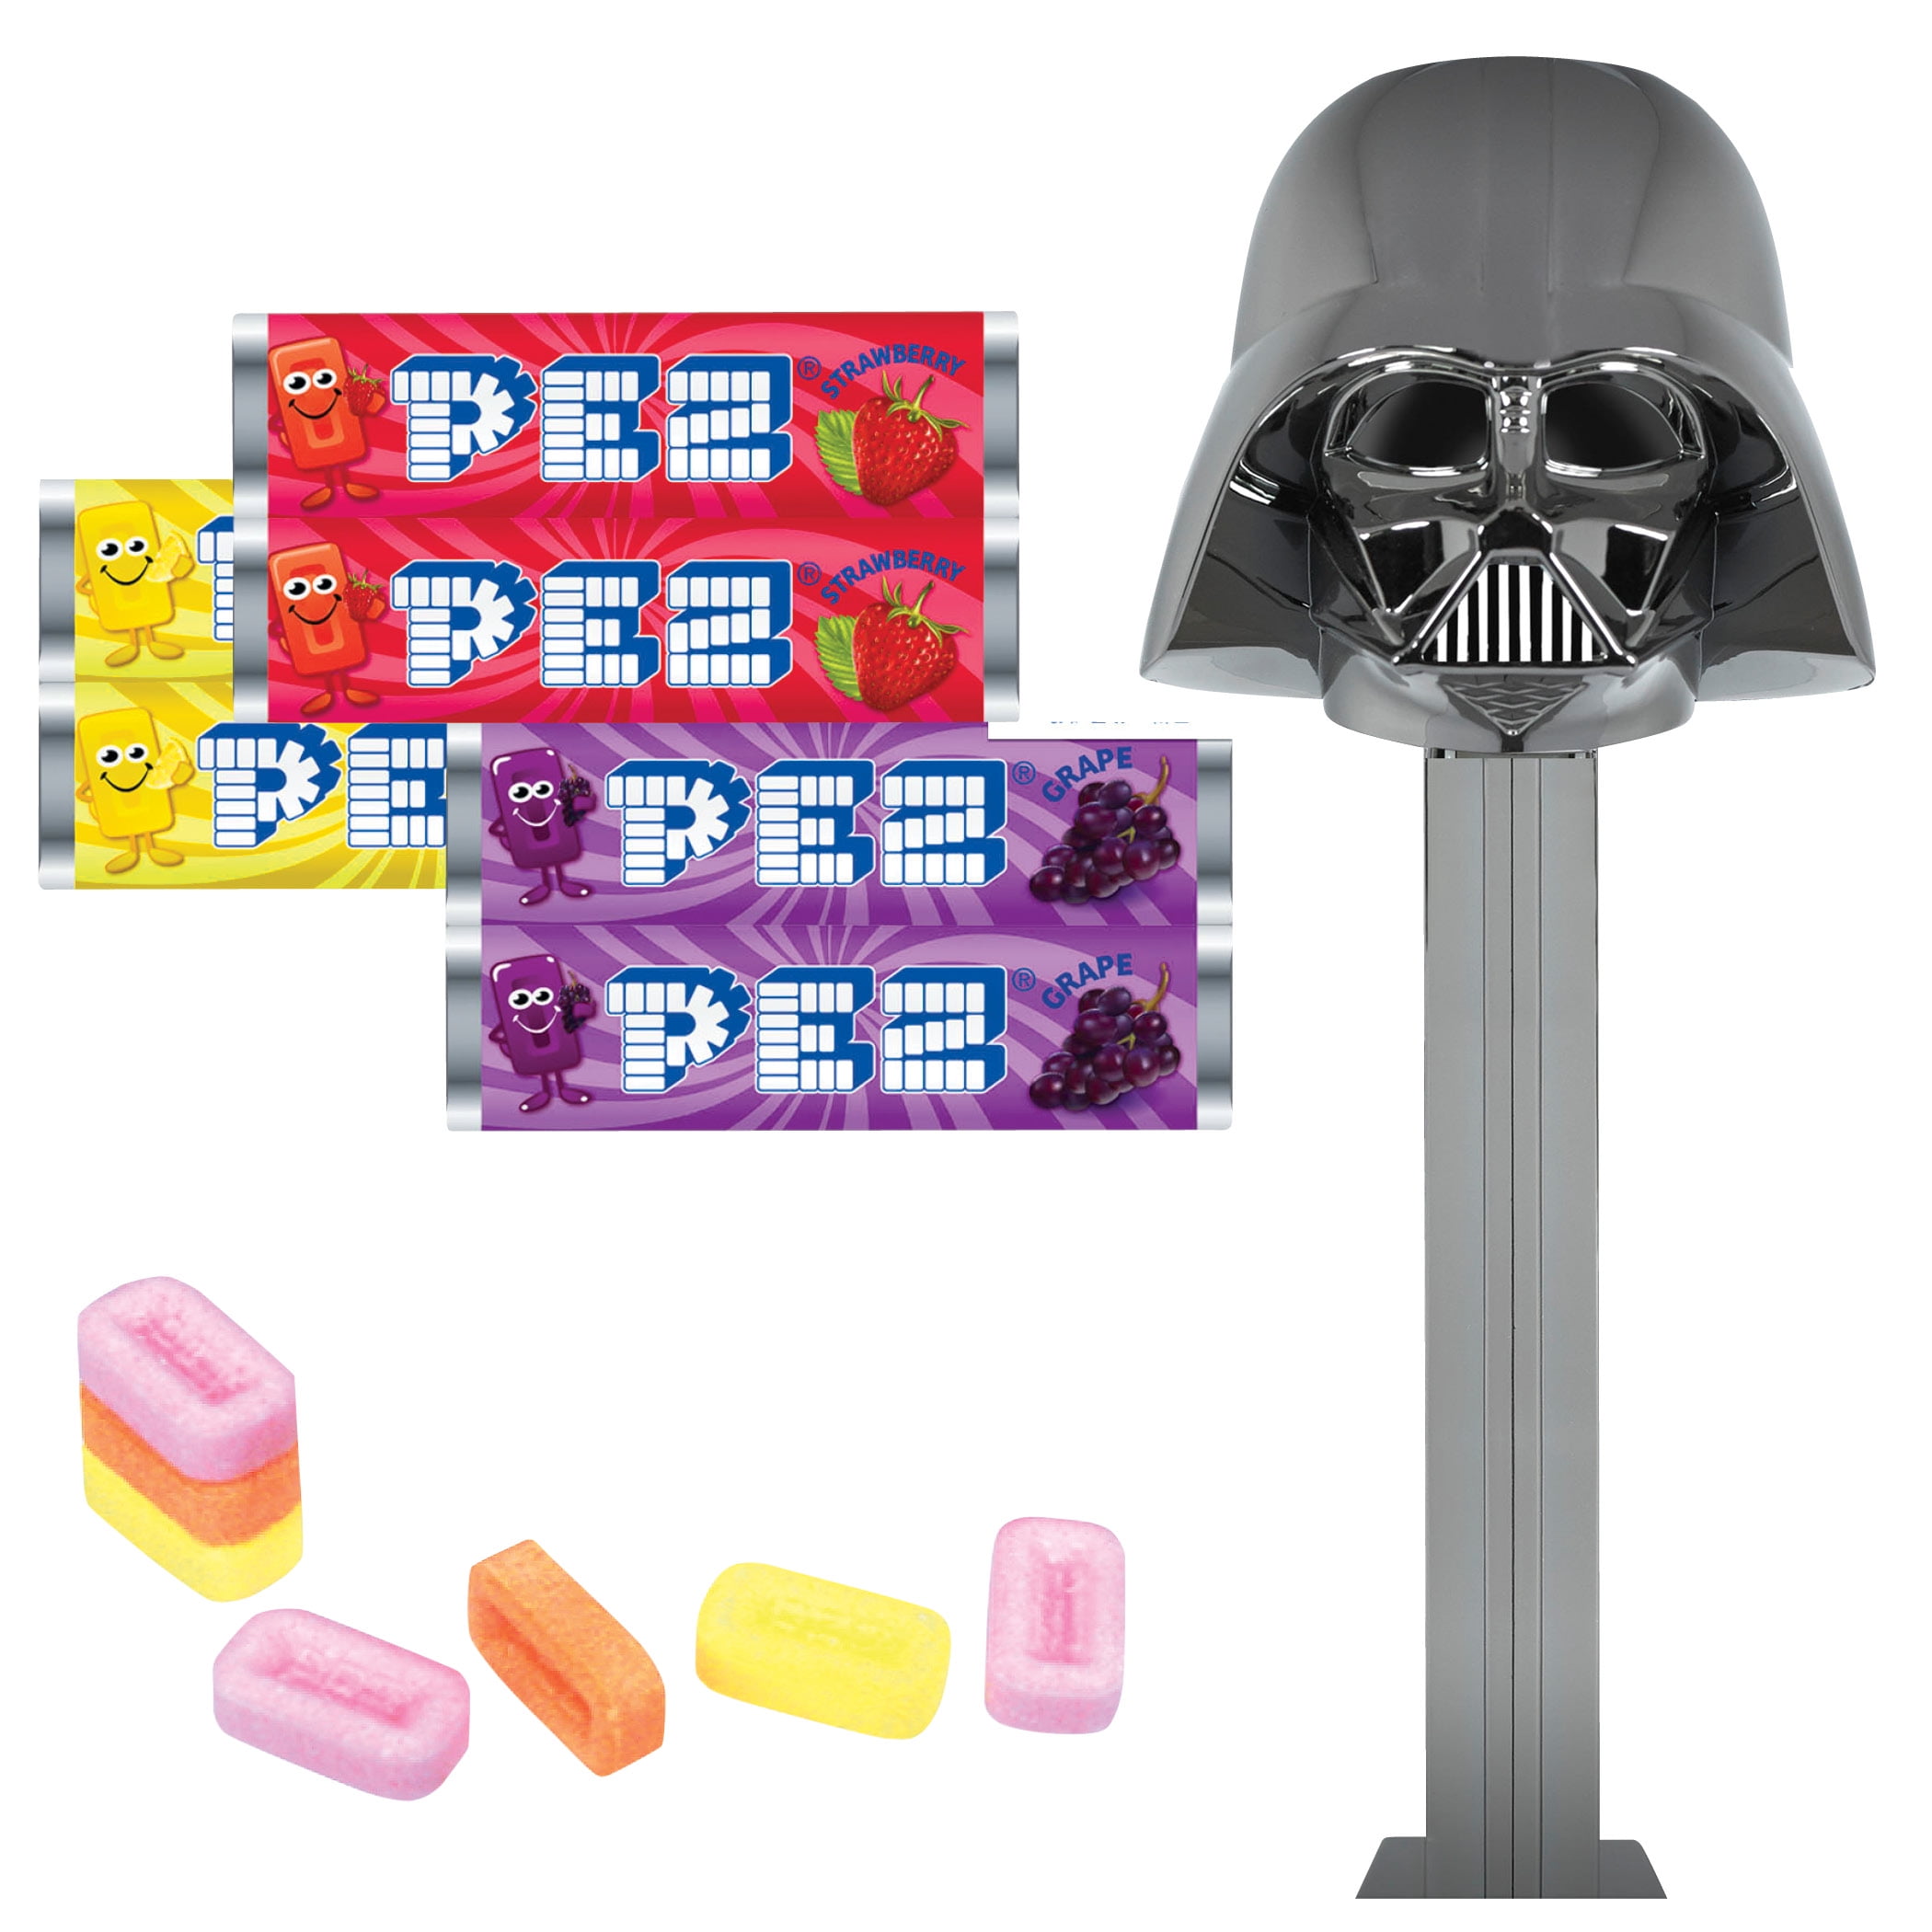 Brand New and Sealed Details about   PEZ: Star Wars Darth Vader black stick red pack 